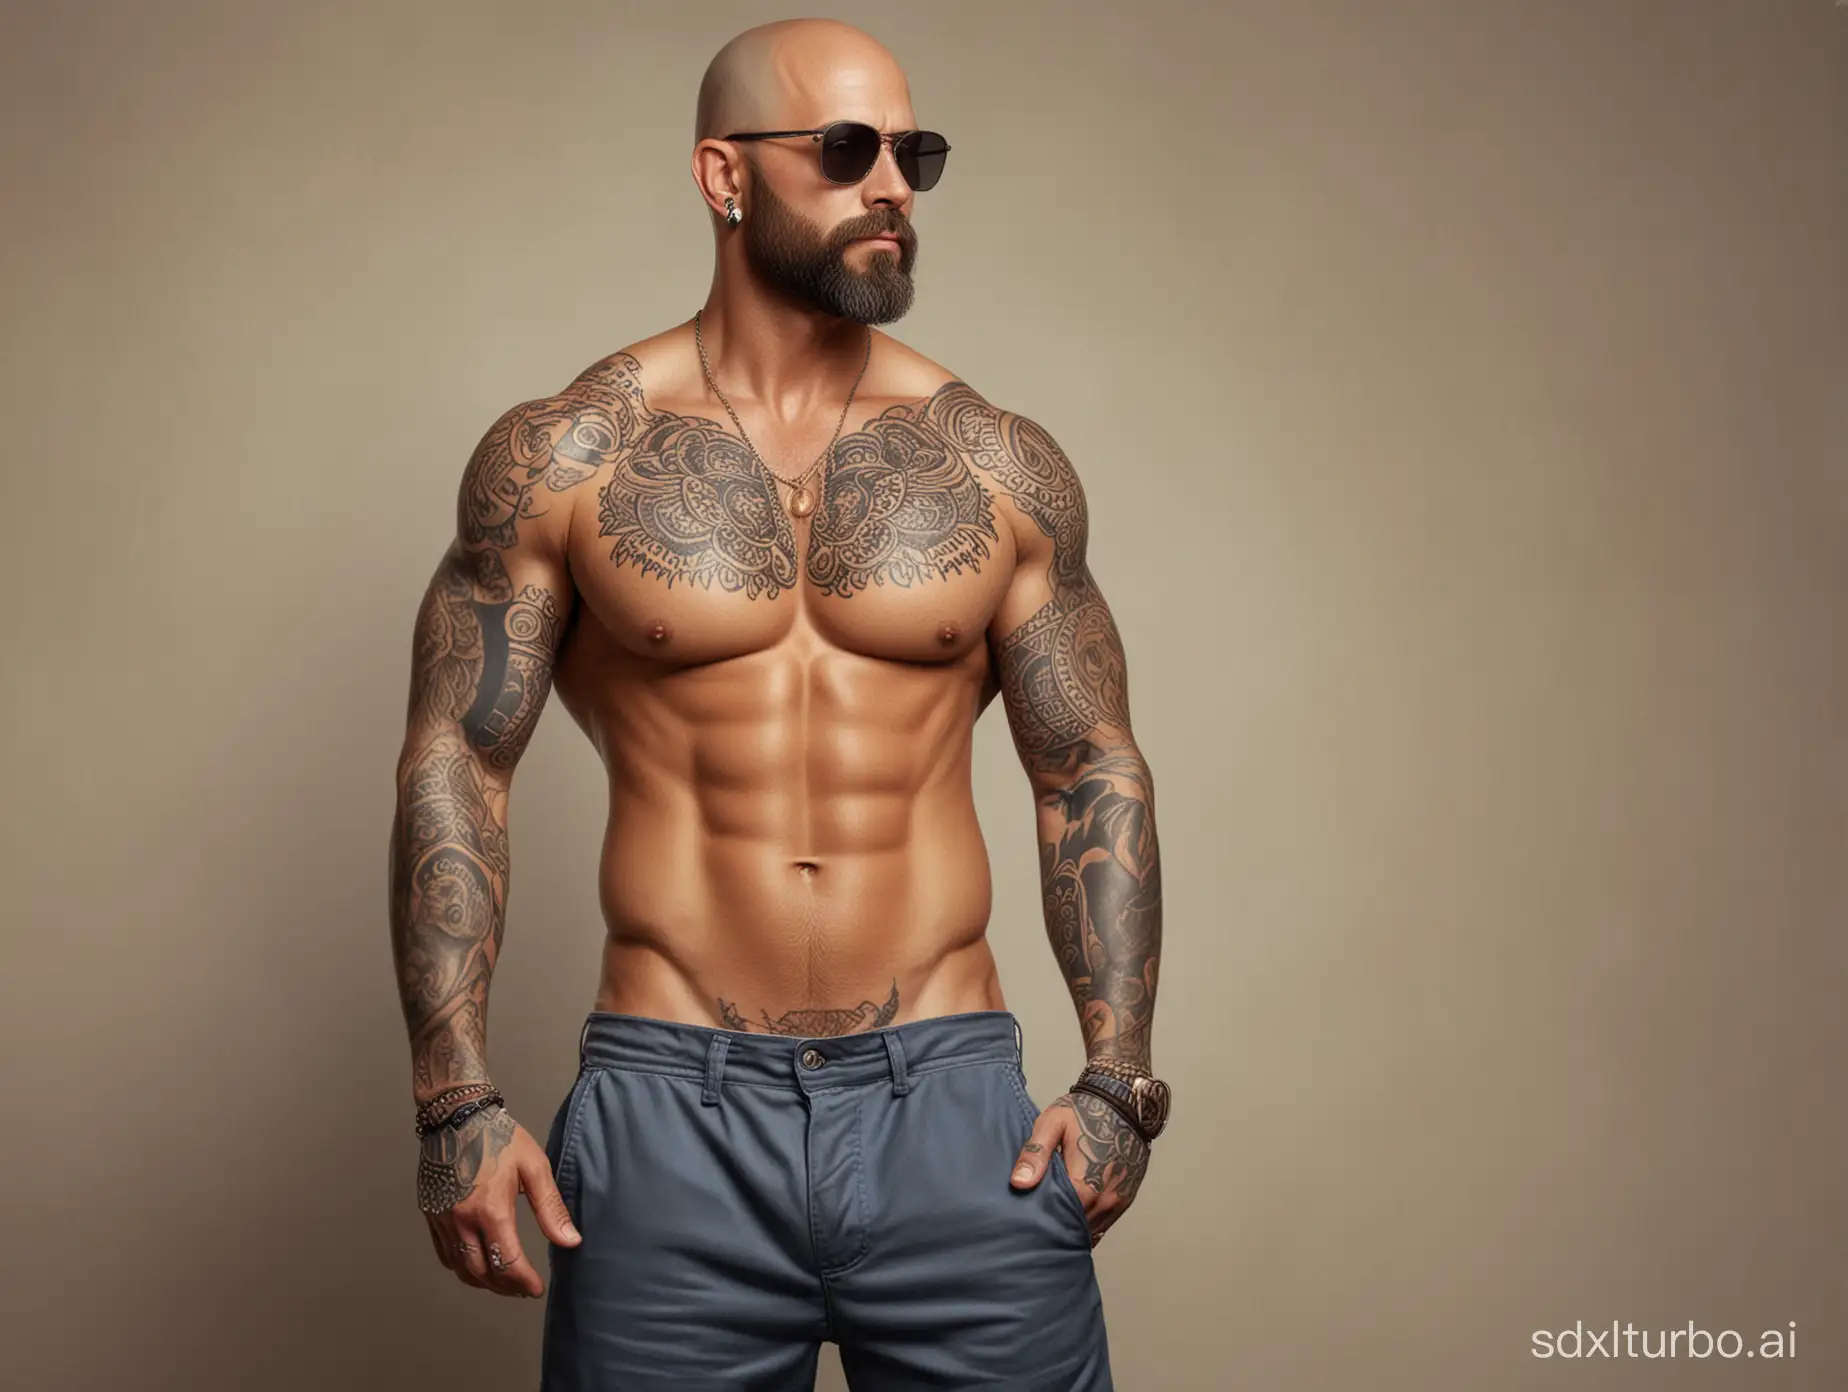 Tattooed-Muscular-Man-with-Sunglasses-and-Earrings-in-a-Natural-Setting